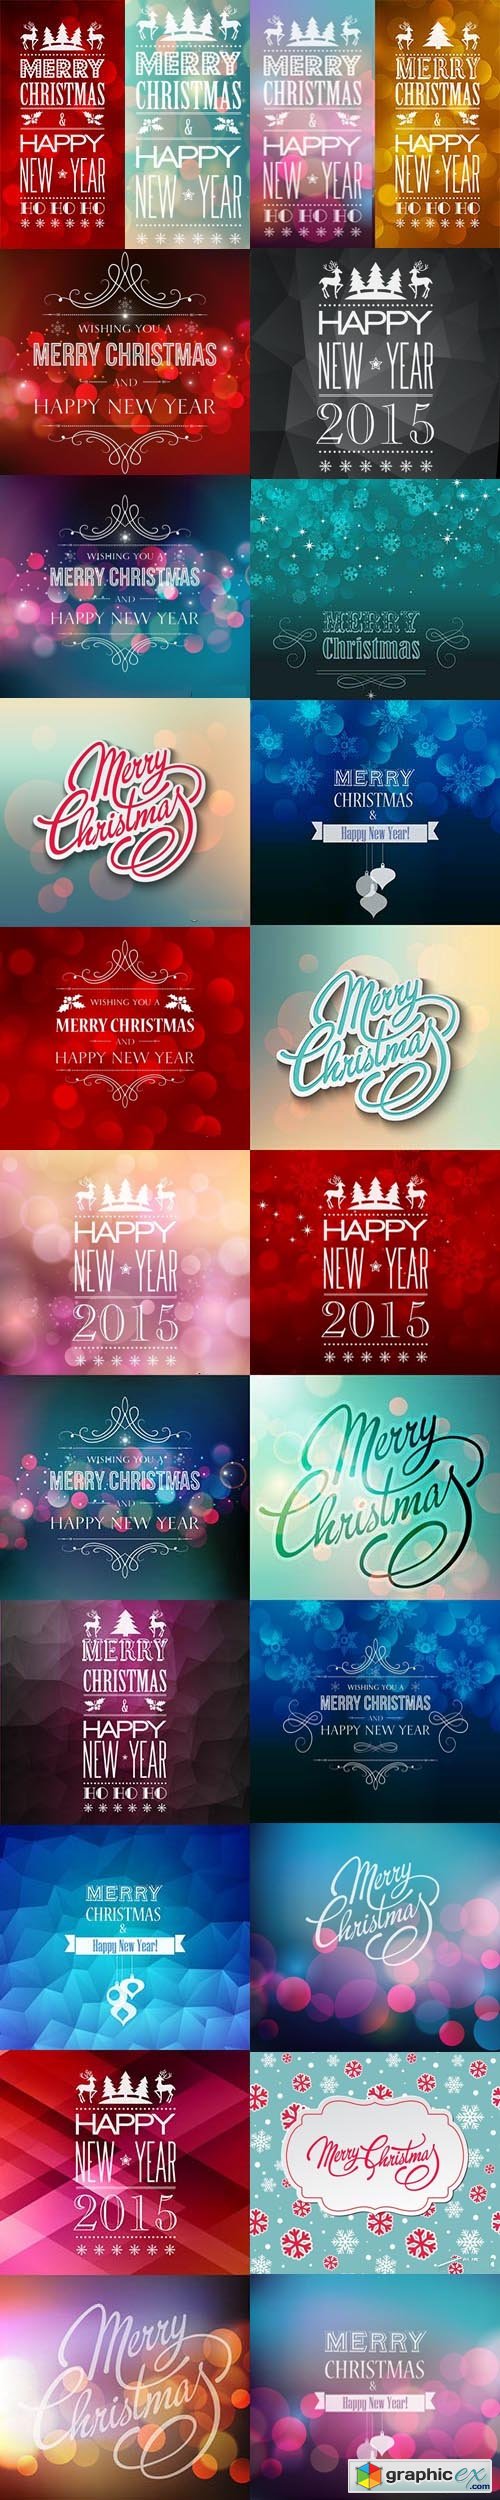 Stock Vector - Abstract Christmas Backgrounds